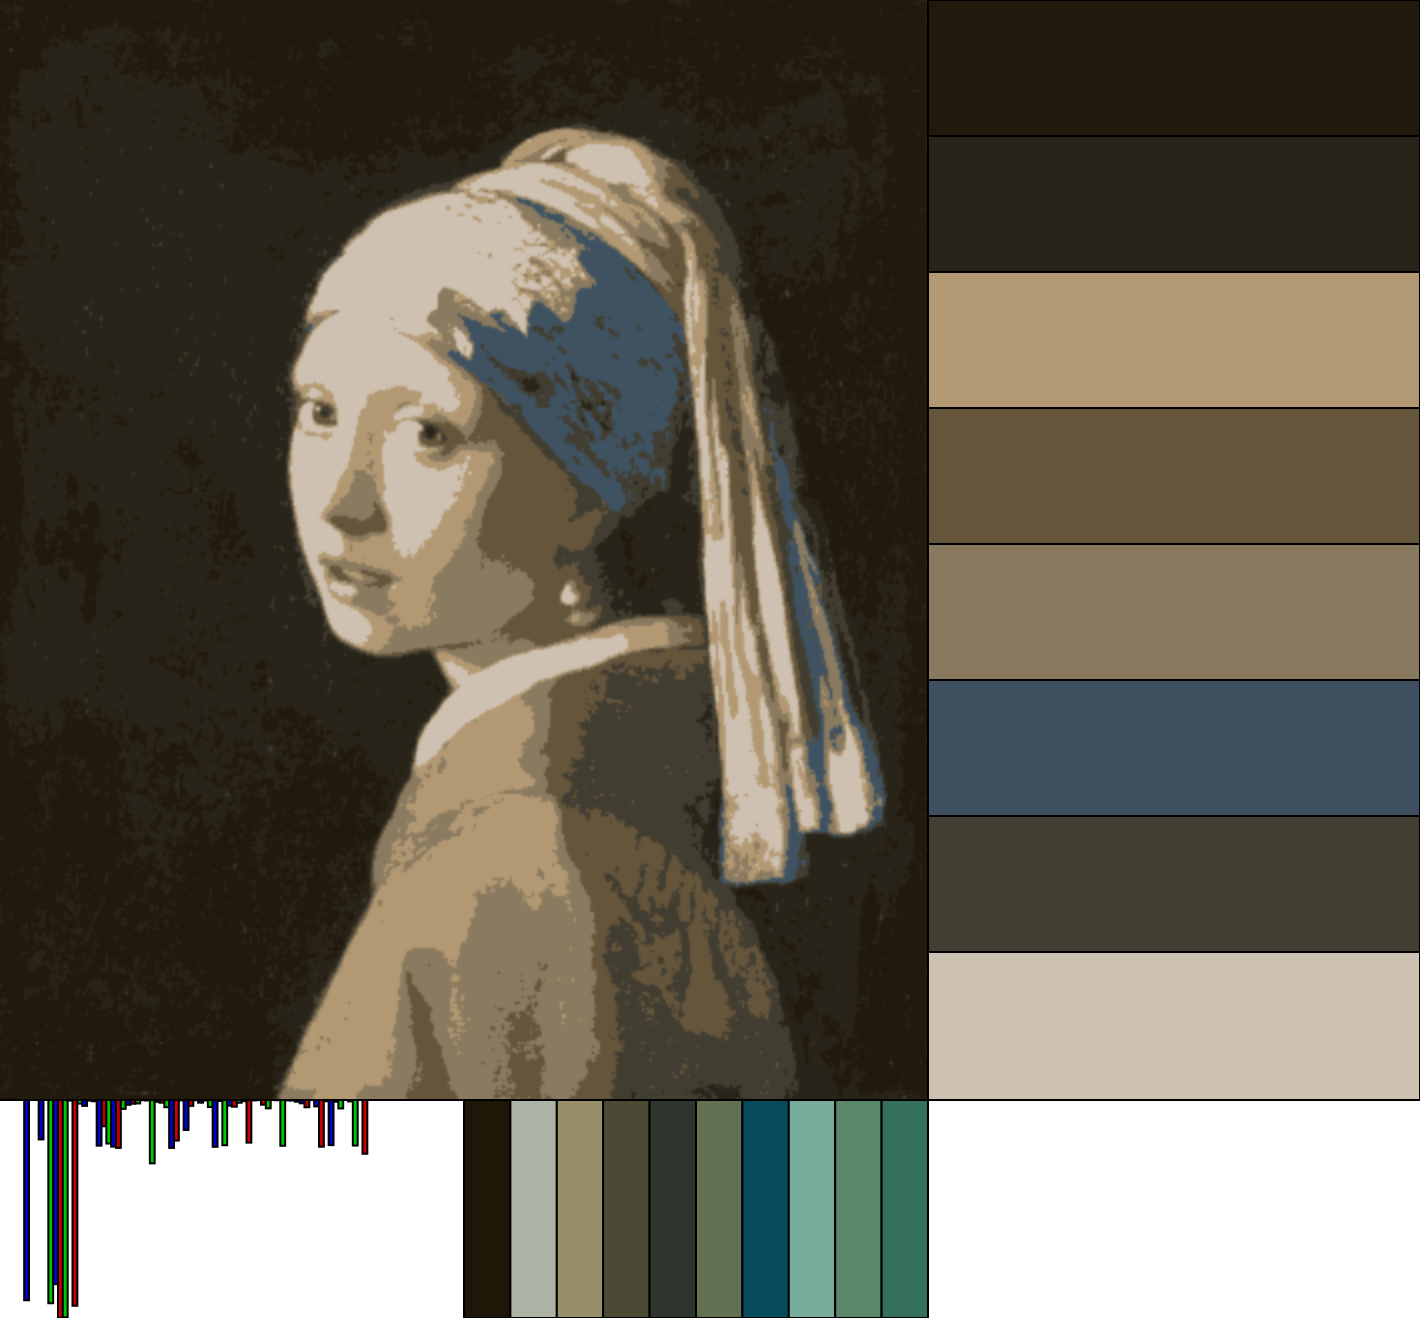 Palette sketch, with recently added quantization